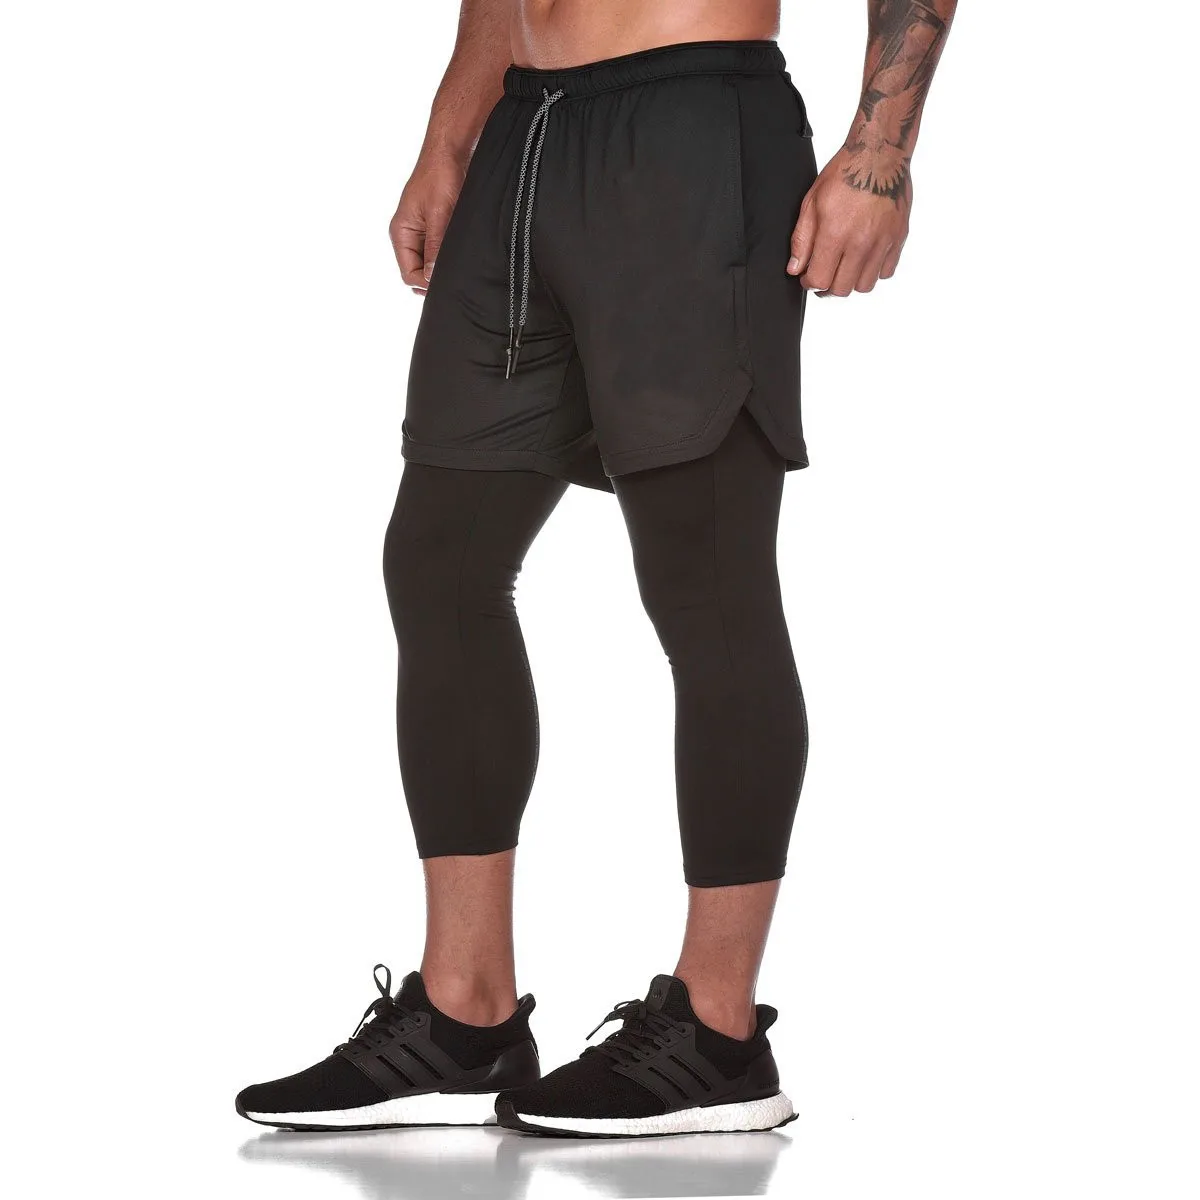 Hulpvktsgiq Mens Running Training 2 in 1 Compression Tights Pants Shorts Workout Gym Legging Activewear Pants with Pockets